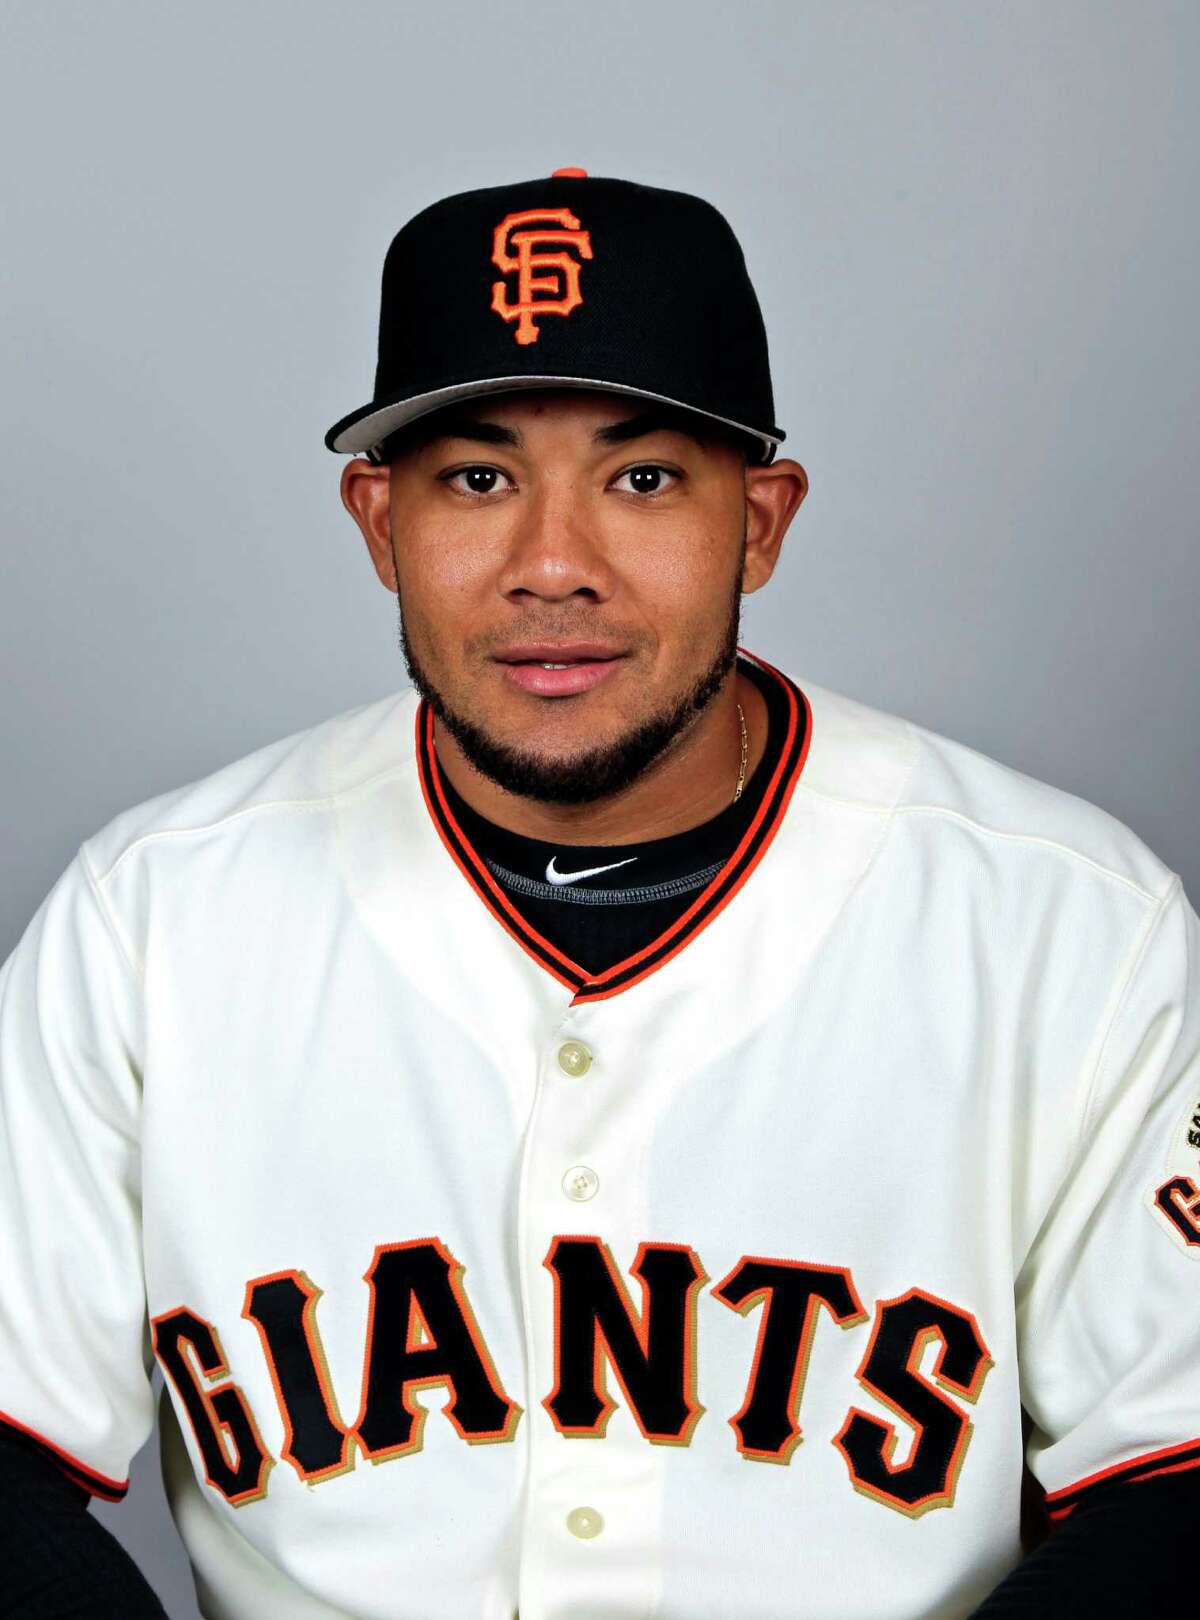 FILE - This March 1, 2012 file photo shows San Francisco Giants baseball player Melky Cabrera. Cabrera has been suspended for 50 games without pay after testing positive for testosterone. The commissioner's office says the suspension is effective immediately. Major League Baseball said on Wednesday, Aug. 15, 2012, that Cabrera tested positive for the banned performance-enhancing substance, which violates MLB's joint drug prevention and treatment program. (AP Photo/Morry Gash, File)